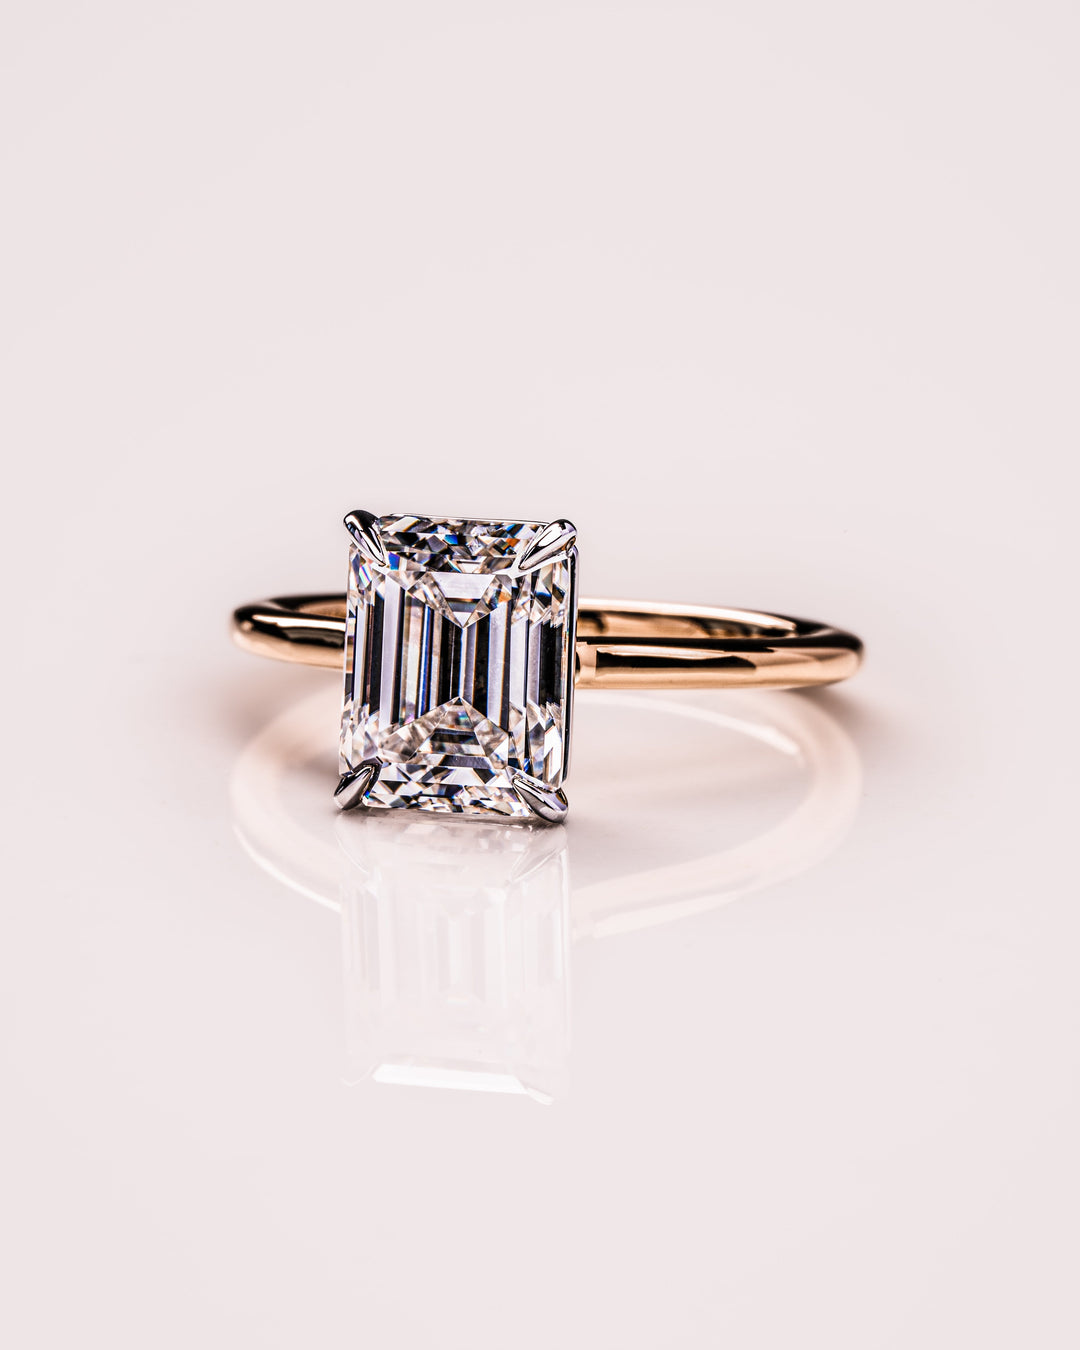 2.3 CT Emerald Cut Solitaire Moissanite Engagement Ring